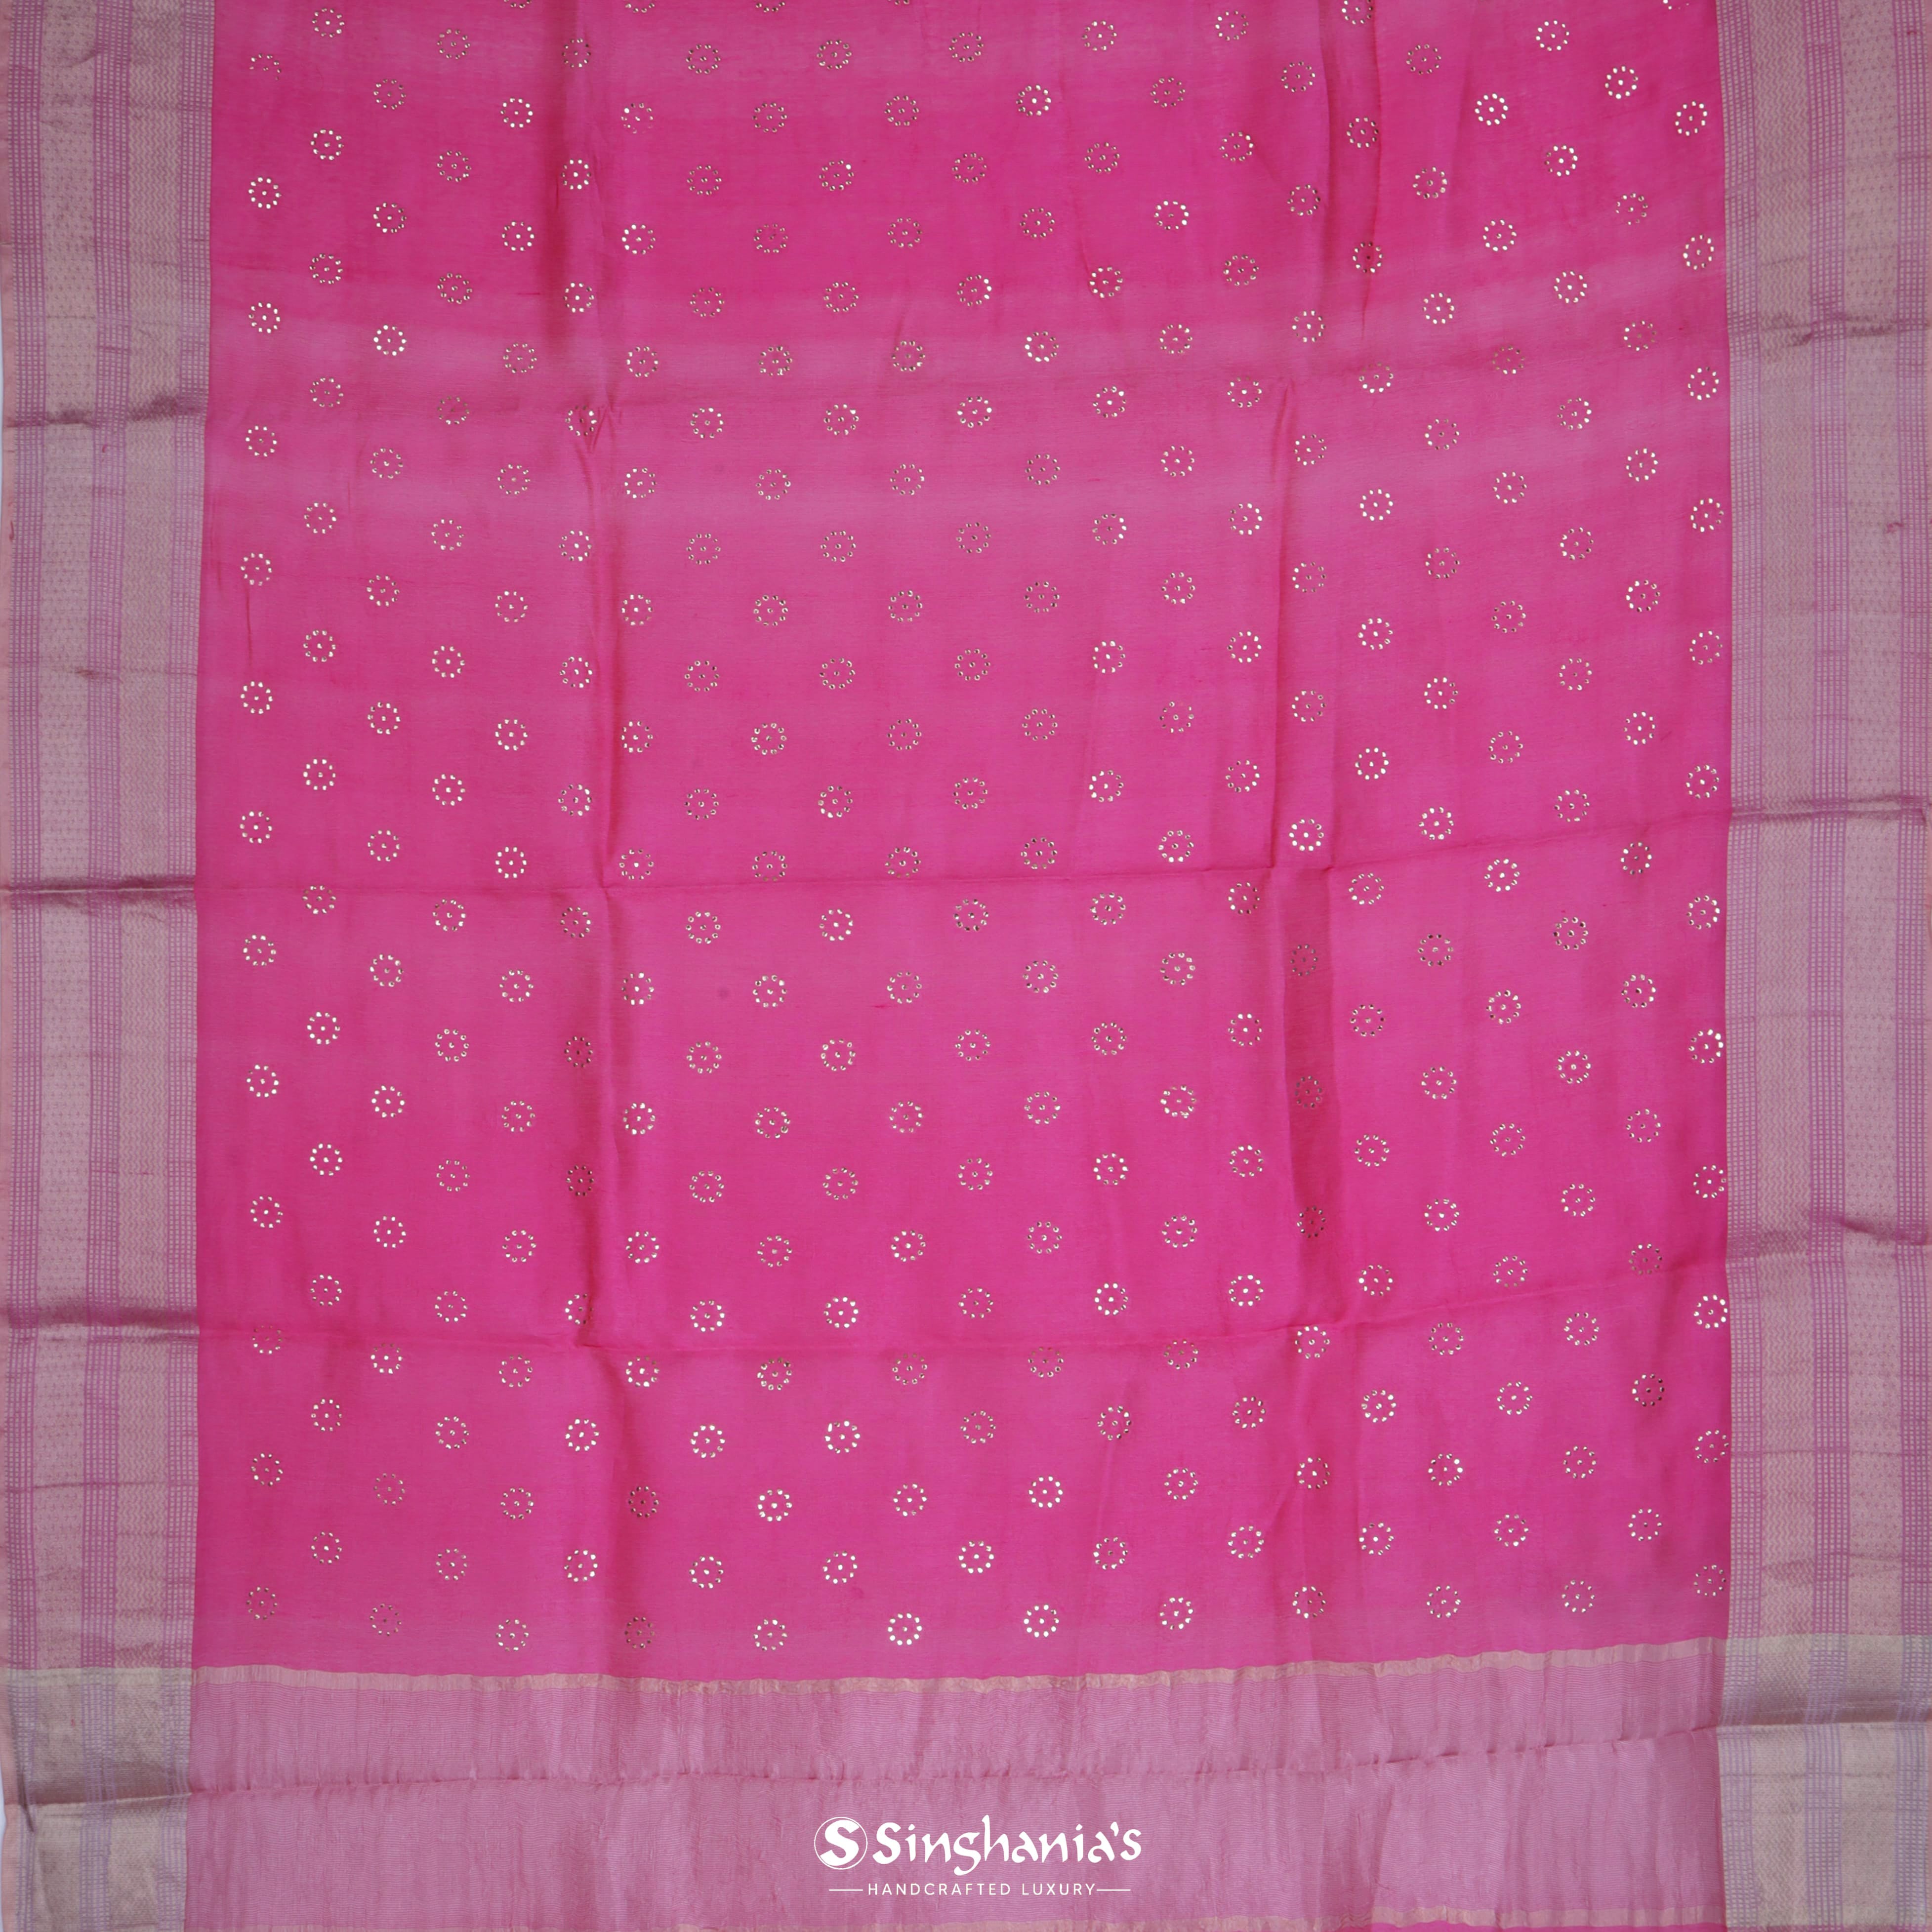 Cherry Red Organza Tussar Embroidery Handloom Silk Saree With Foil Print